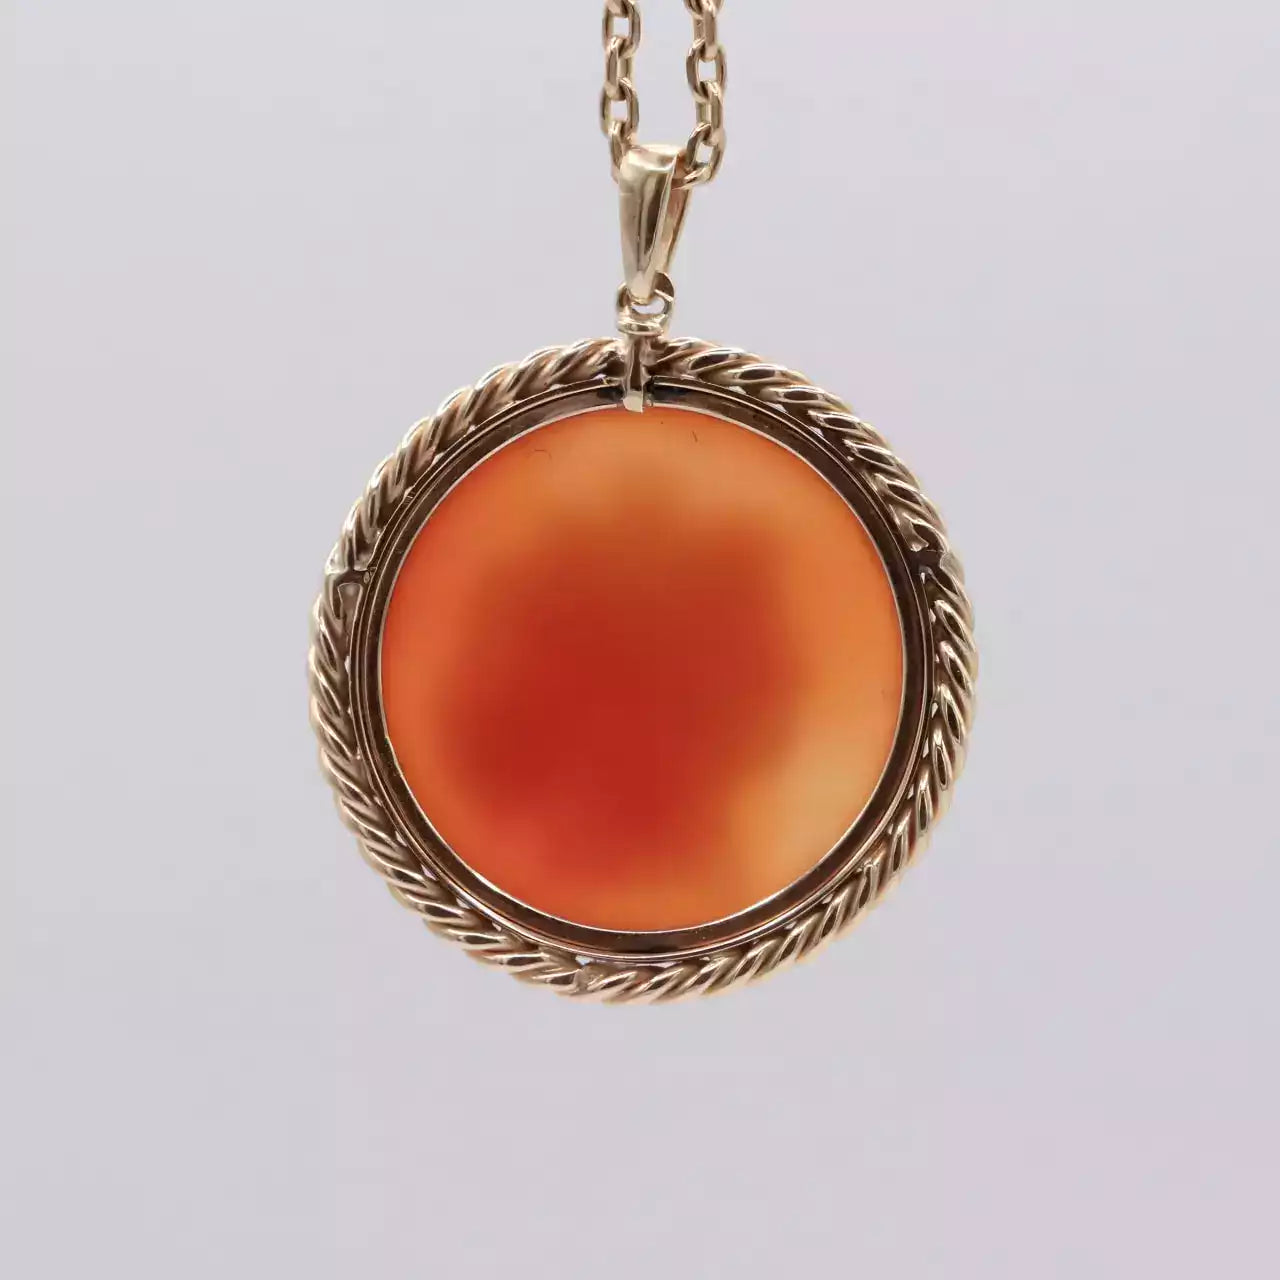 Twisted pendant - Anitque cameo